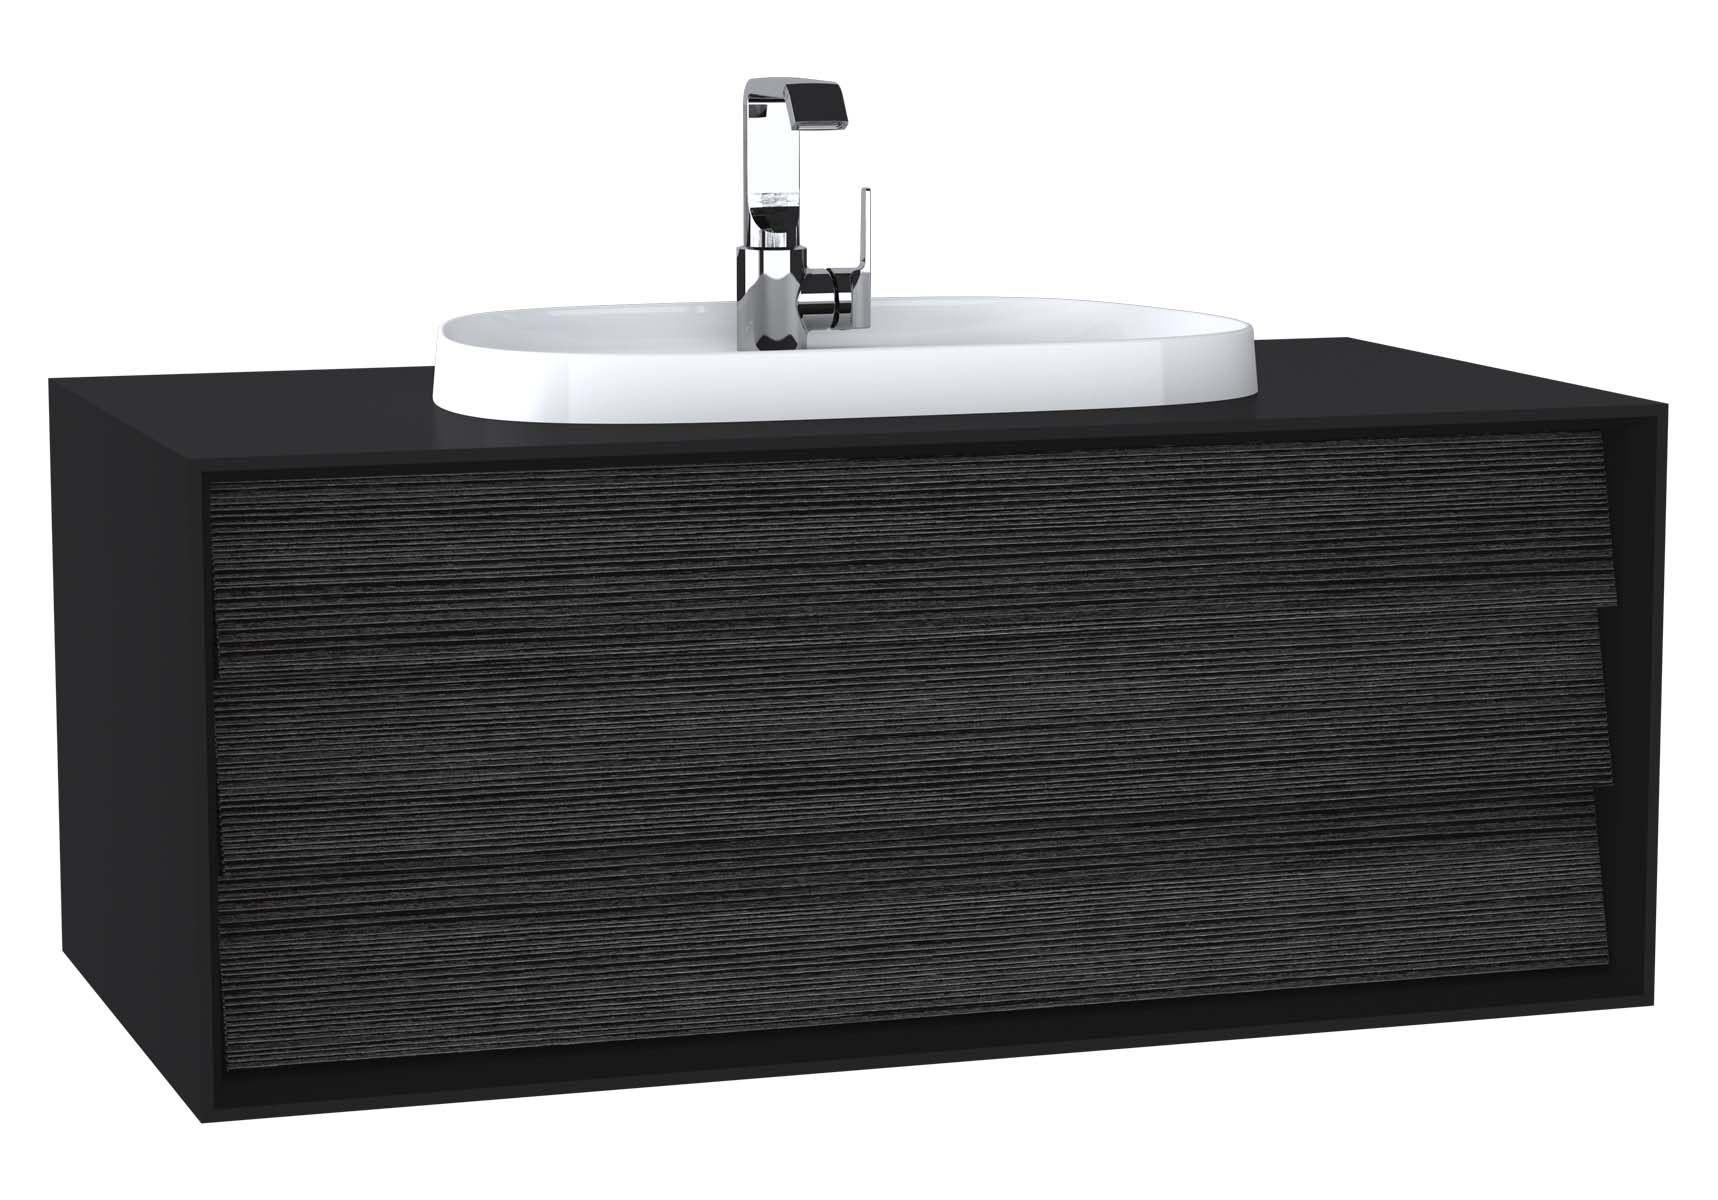 Frame Washbasin Unit, 100 cm, with 1 drawer, with countertop TV-shape washbasin, with faucet hole, Matte Black